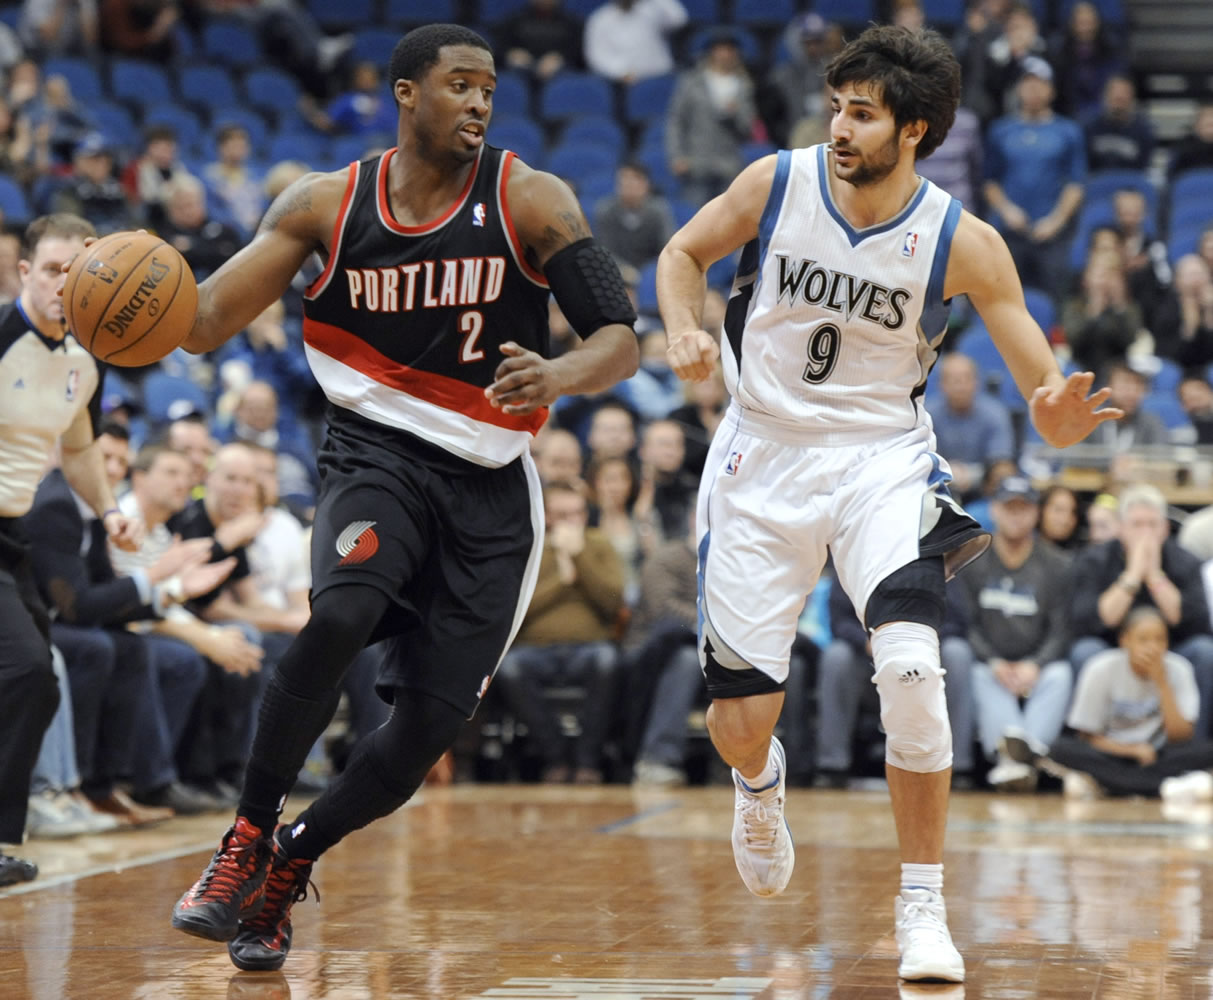 Portland Trail Blazers' Wesley Matthews (2) moves the ball alongside Minnesota Timberwolves' Ricky Rubio (9), of Spain, during the fourth quarter of an NBA basketball game Monday, Feb. 4, 2013, in Minneapolis. The Trail Blazers won 100-98.